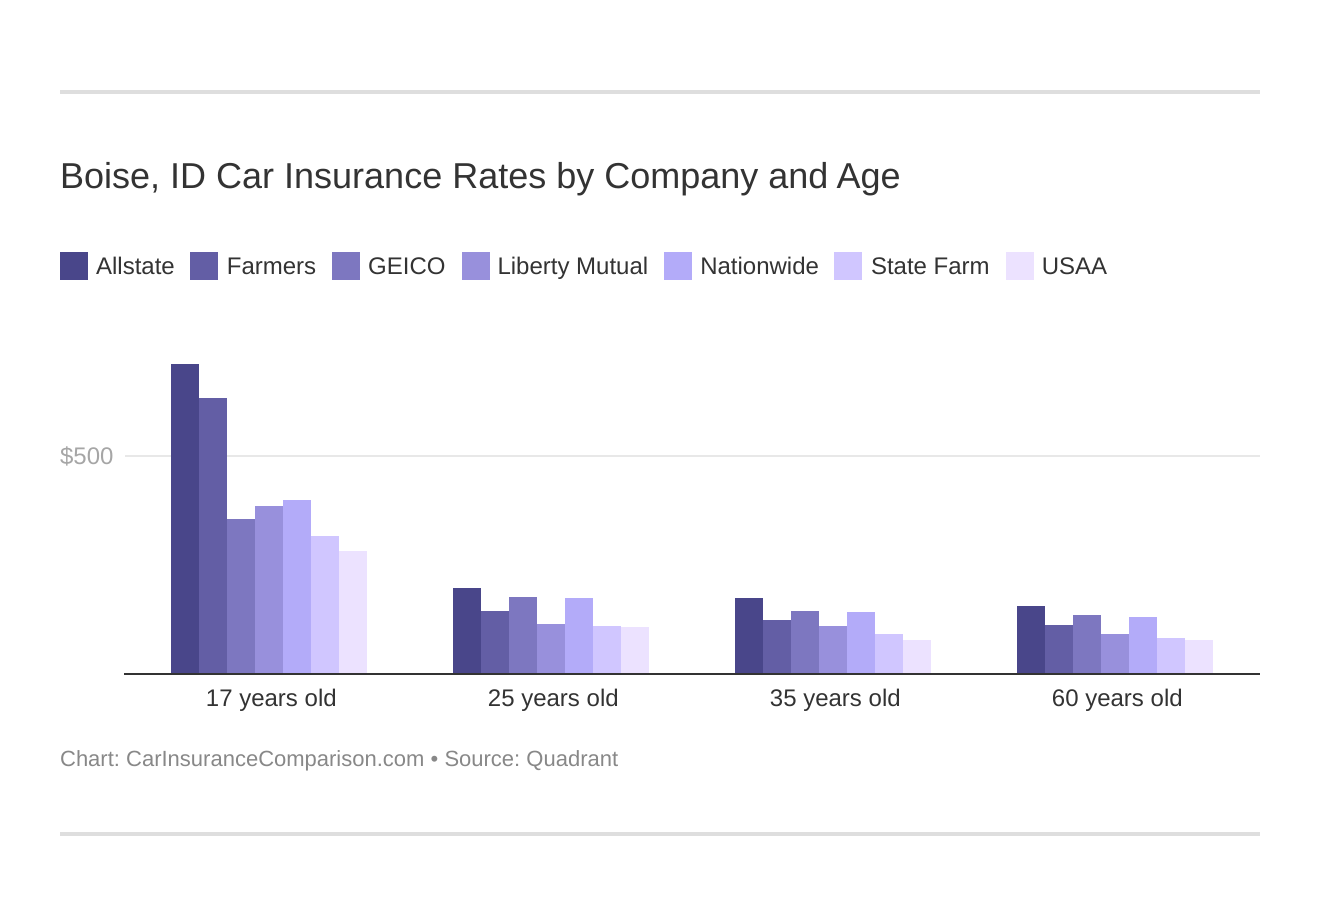 Boise, ID Car Insurance Rates by Company and Age